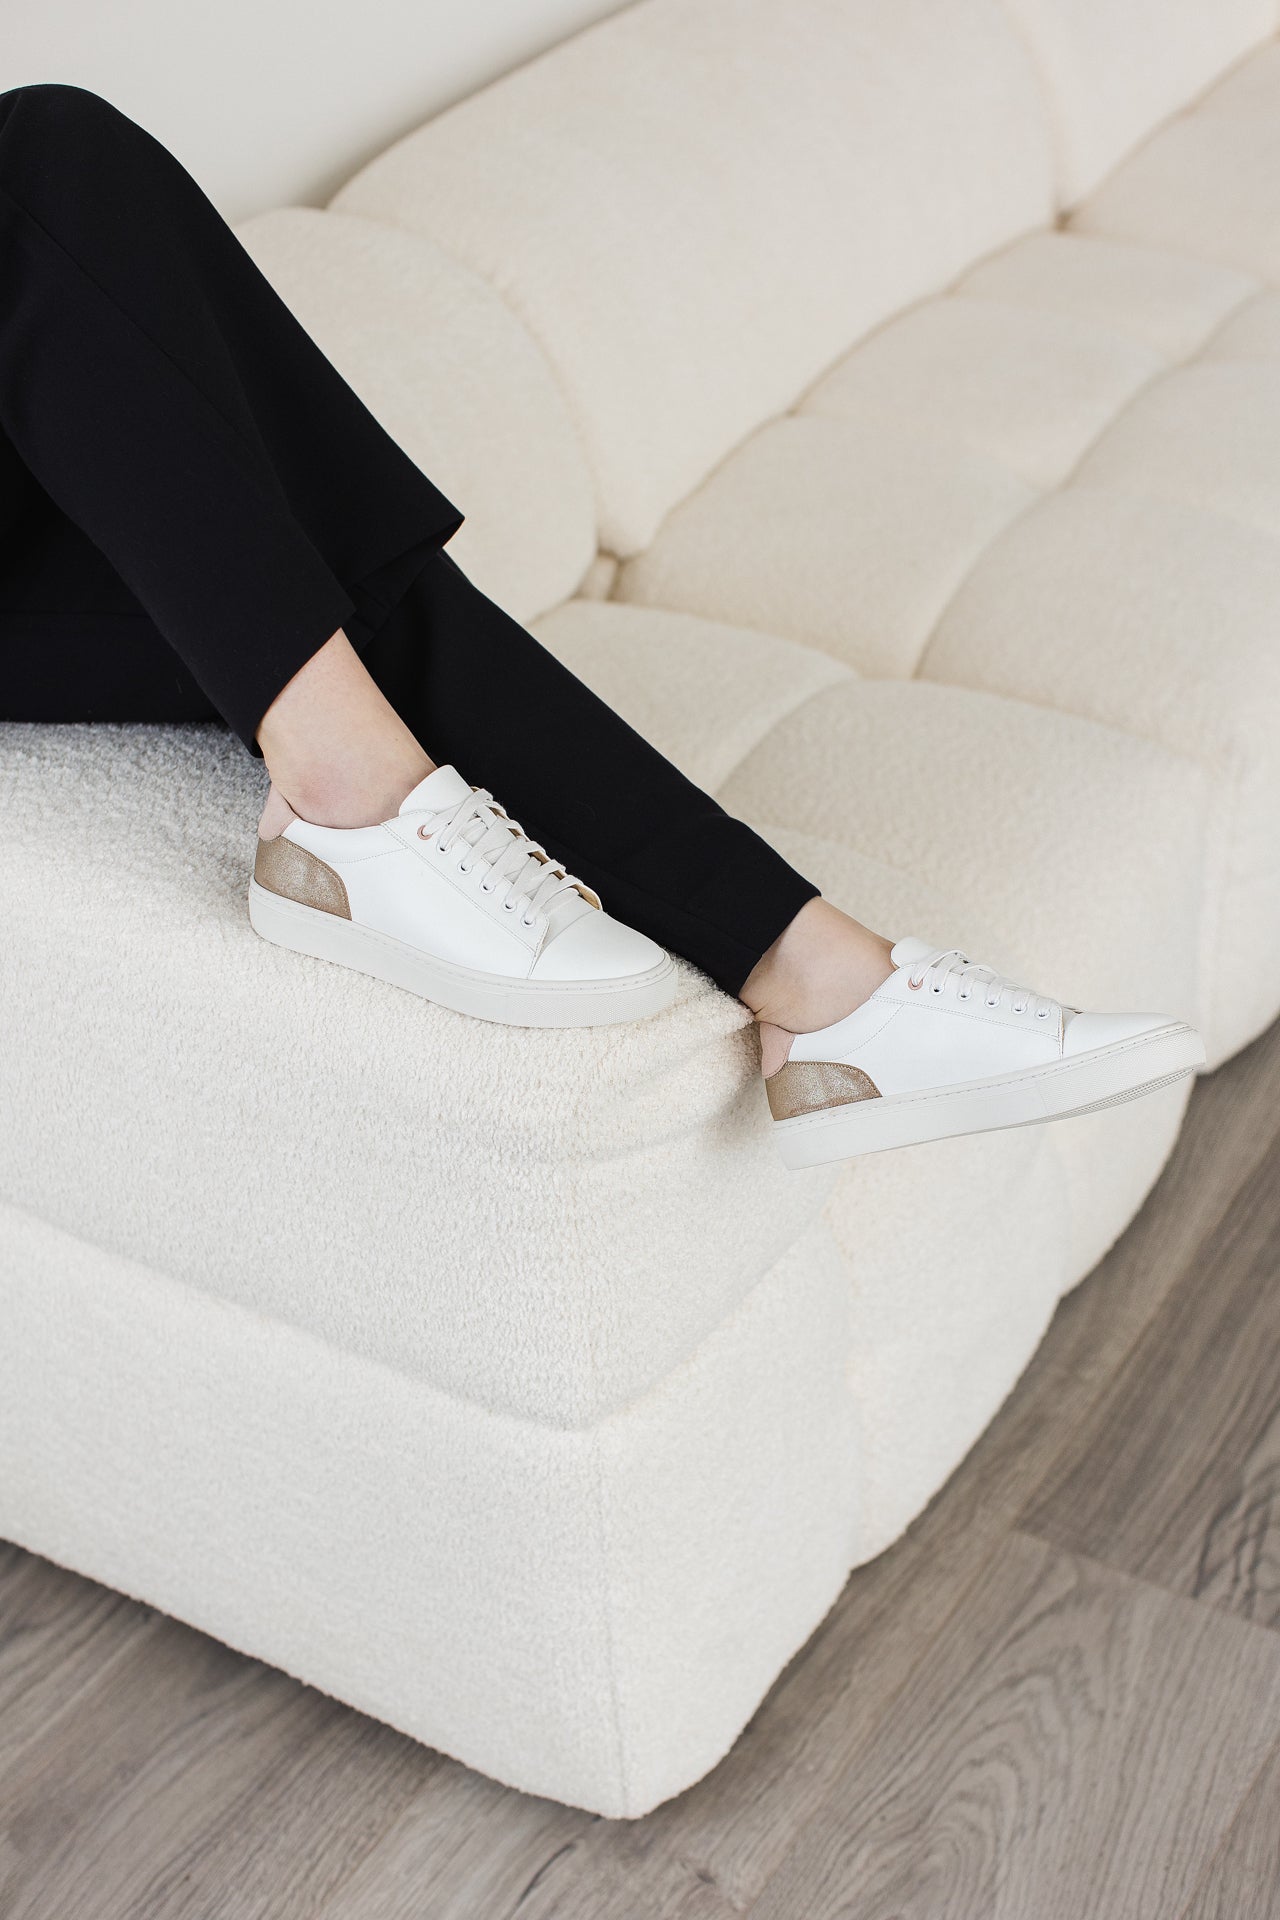 White and blush pink trainers- Aria by ROAM by Rachel Simpson